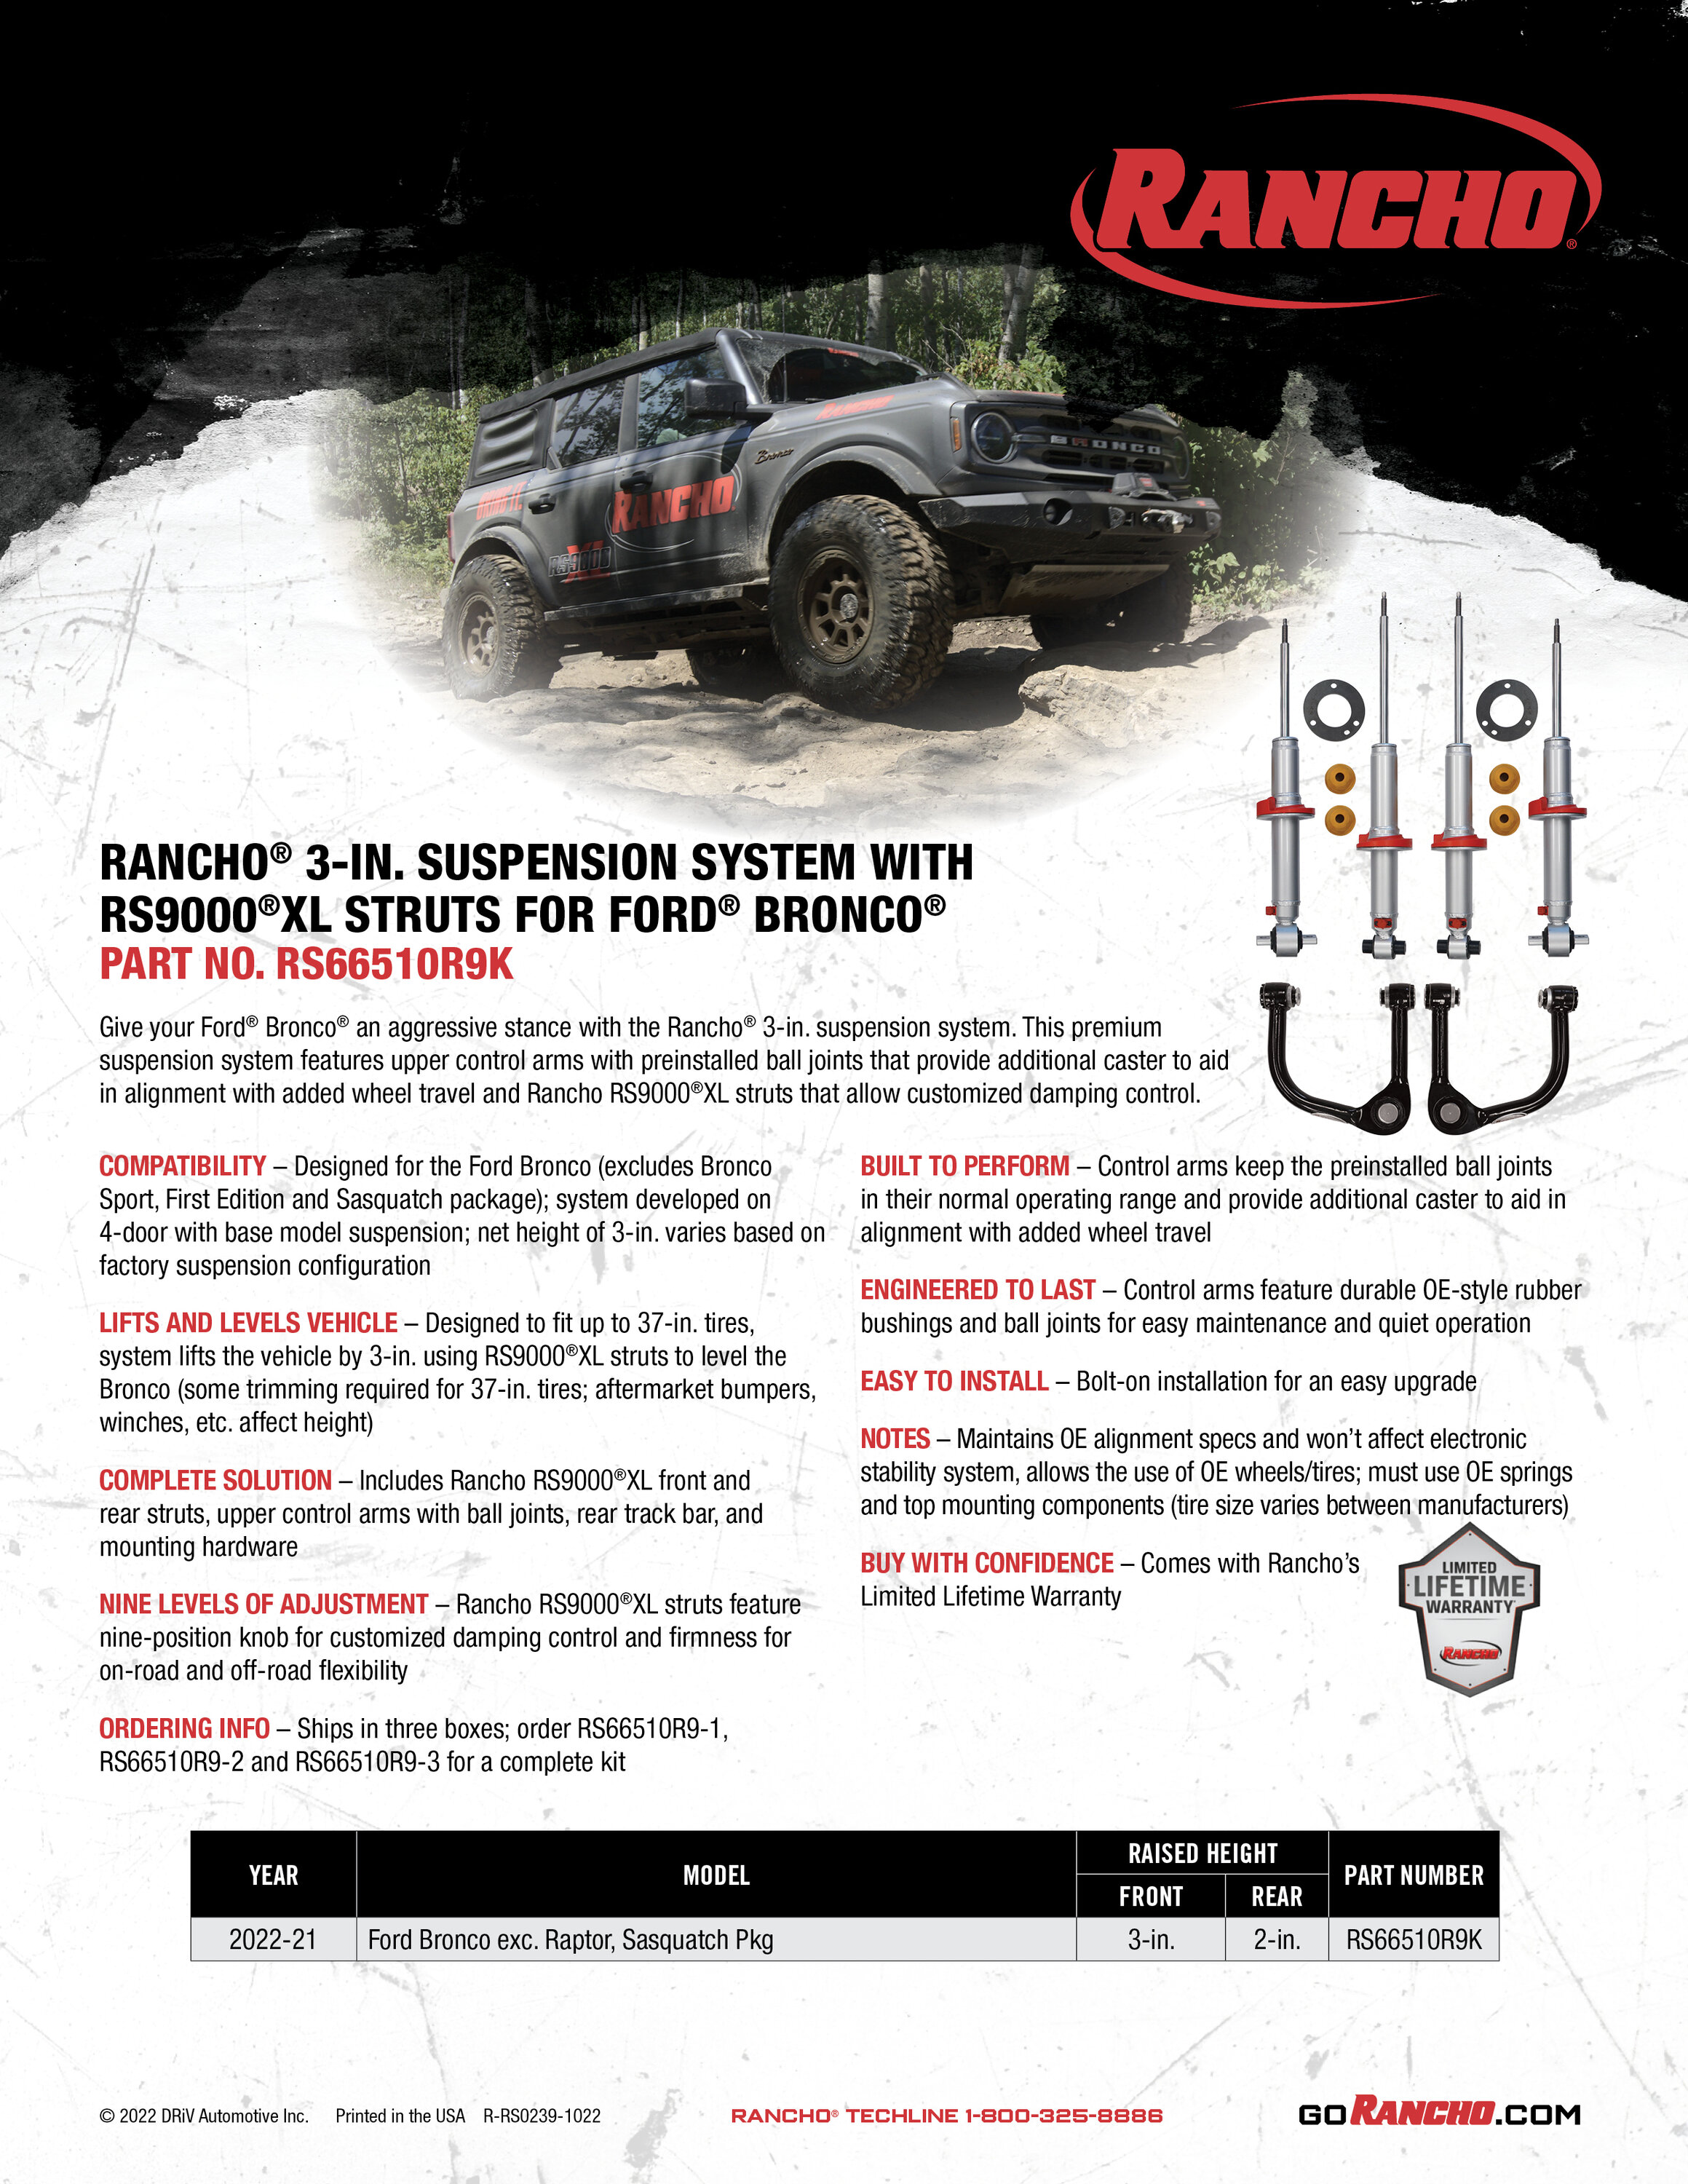 Ford Bronco New Rancho 3" lift & level suspension kit system for the Bronco Bronco SuspensionSystem_RS66510R9K_Sell_101122